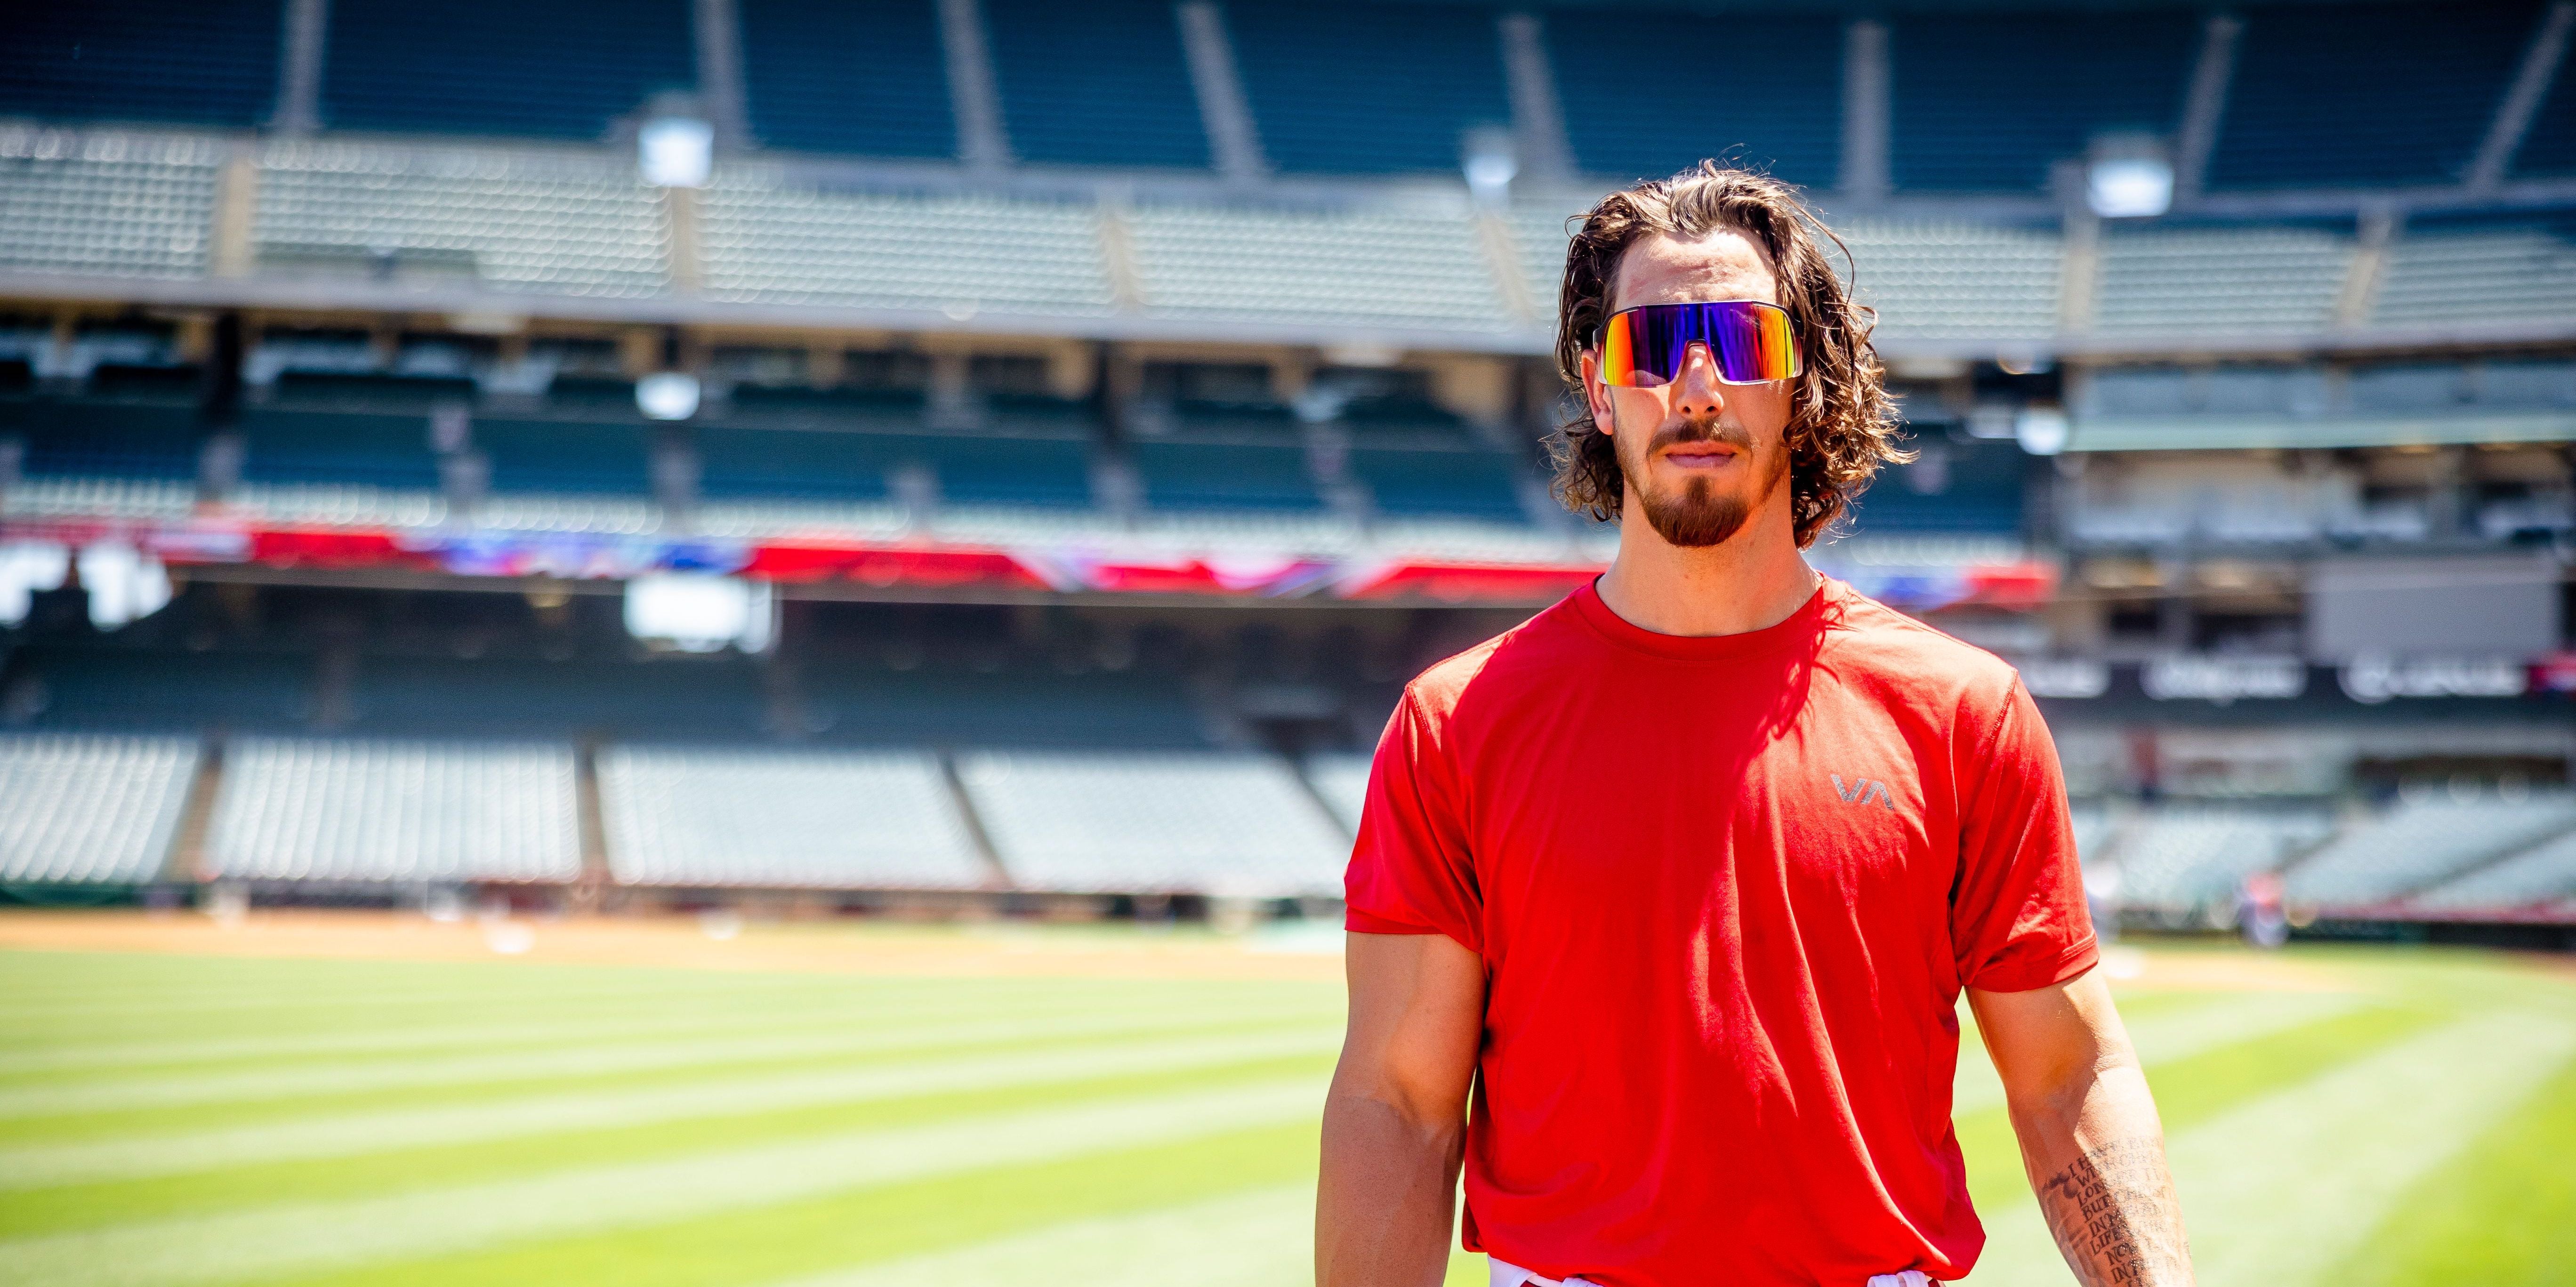 Best Sunglasses for Baseball - Protect Your Eyes on the Field